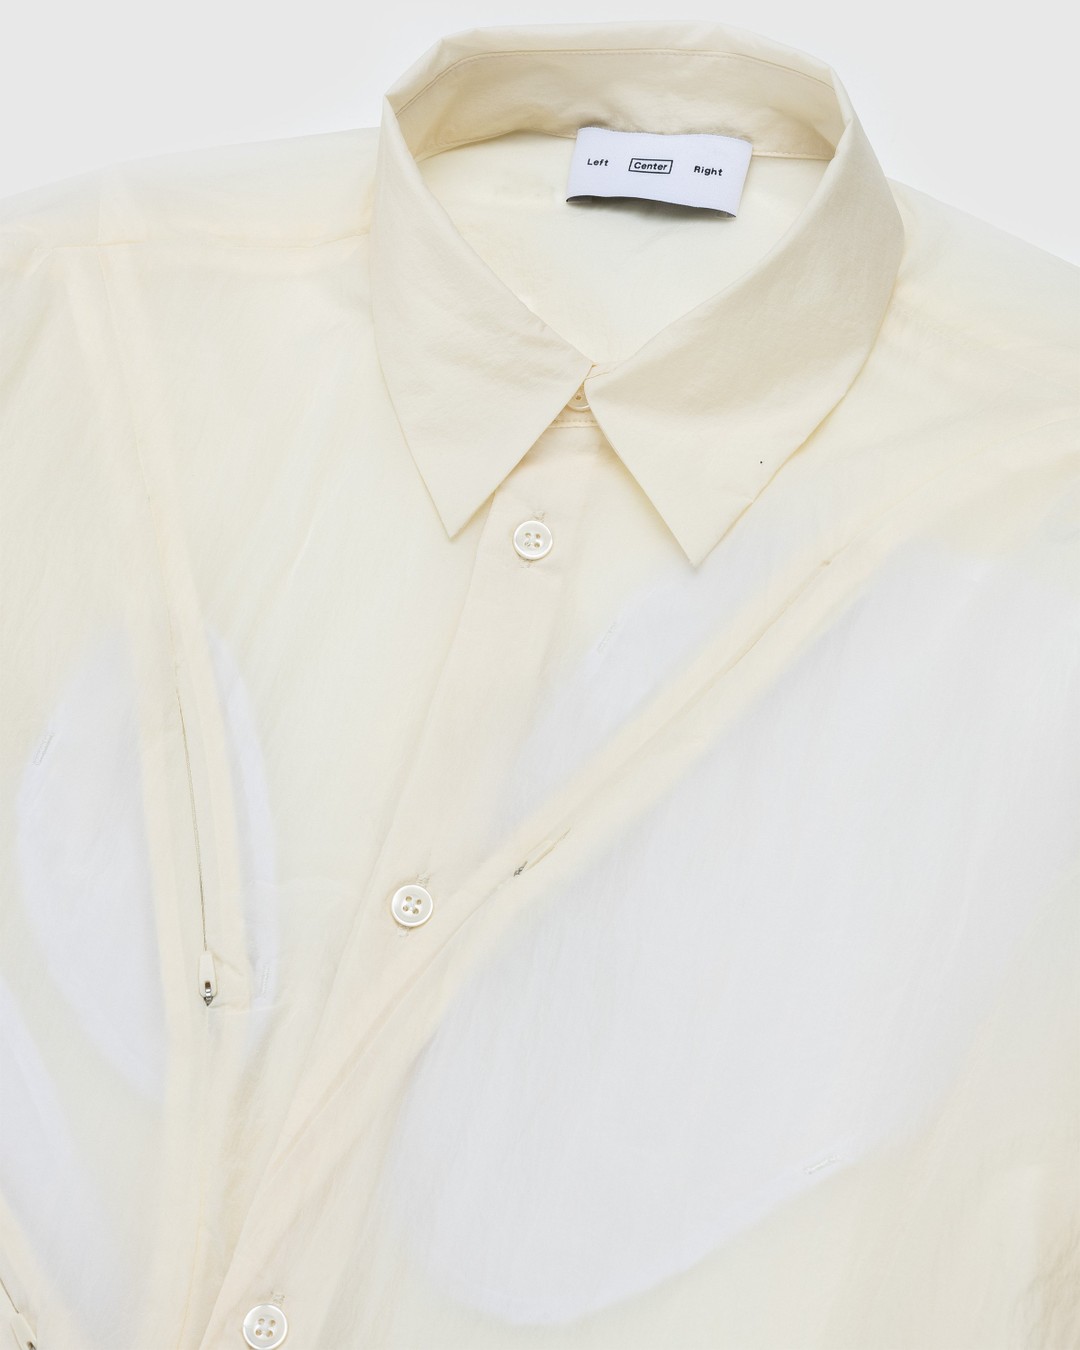 Post Archive Faction (PAF) – 5.0+ Shirt Center Ivory